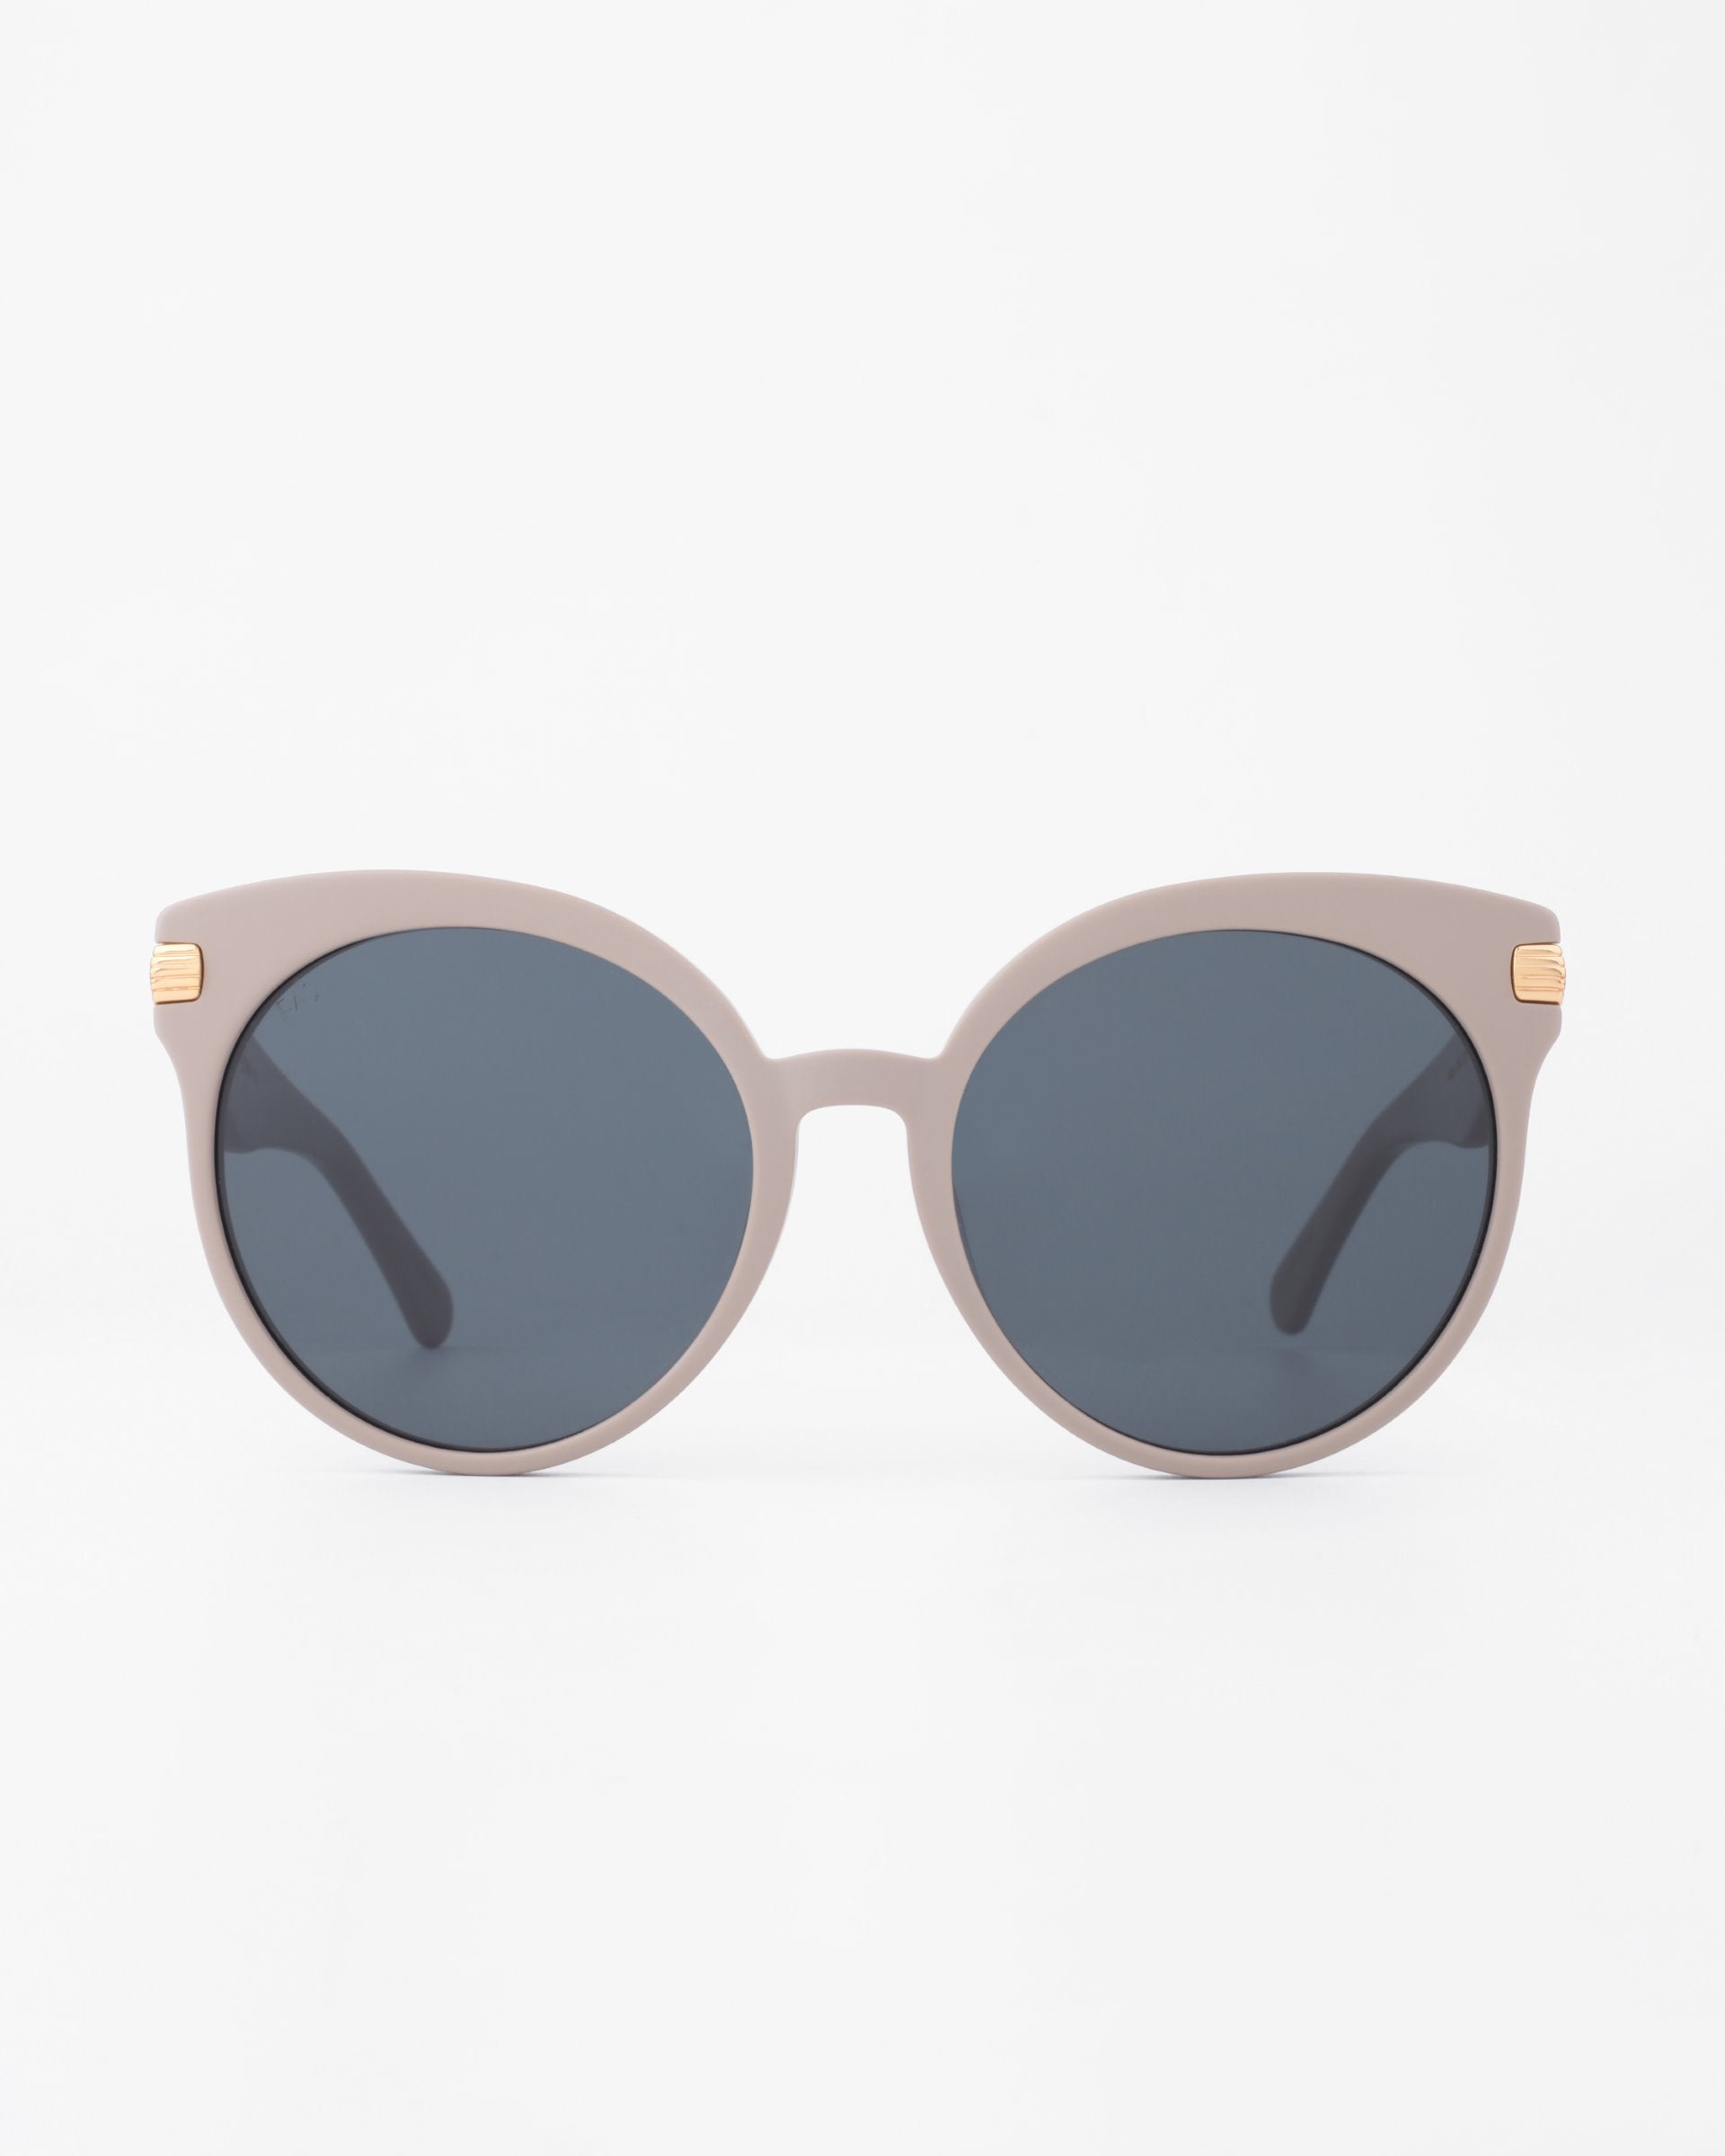 A pair of round, oversized Muse sunglasses with beige frames and dark-tinted, shatter-resistant nylon lenses from For Art&#39;s Sake®. The handmade plant-based acetate frames have 18-karat gold-plated accents on the temples. The sunglasses are set against a plain white background.